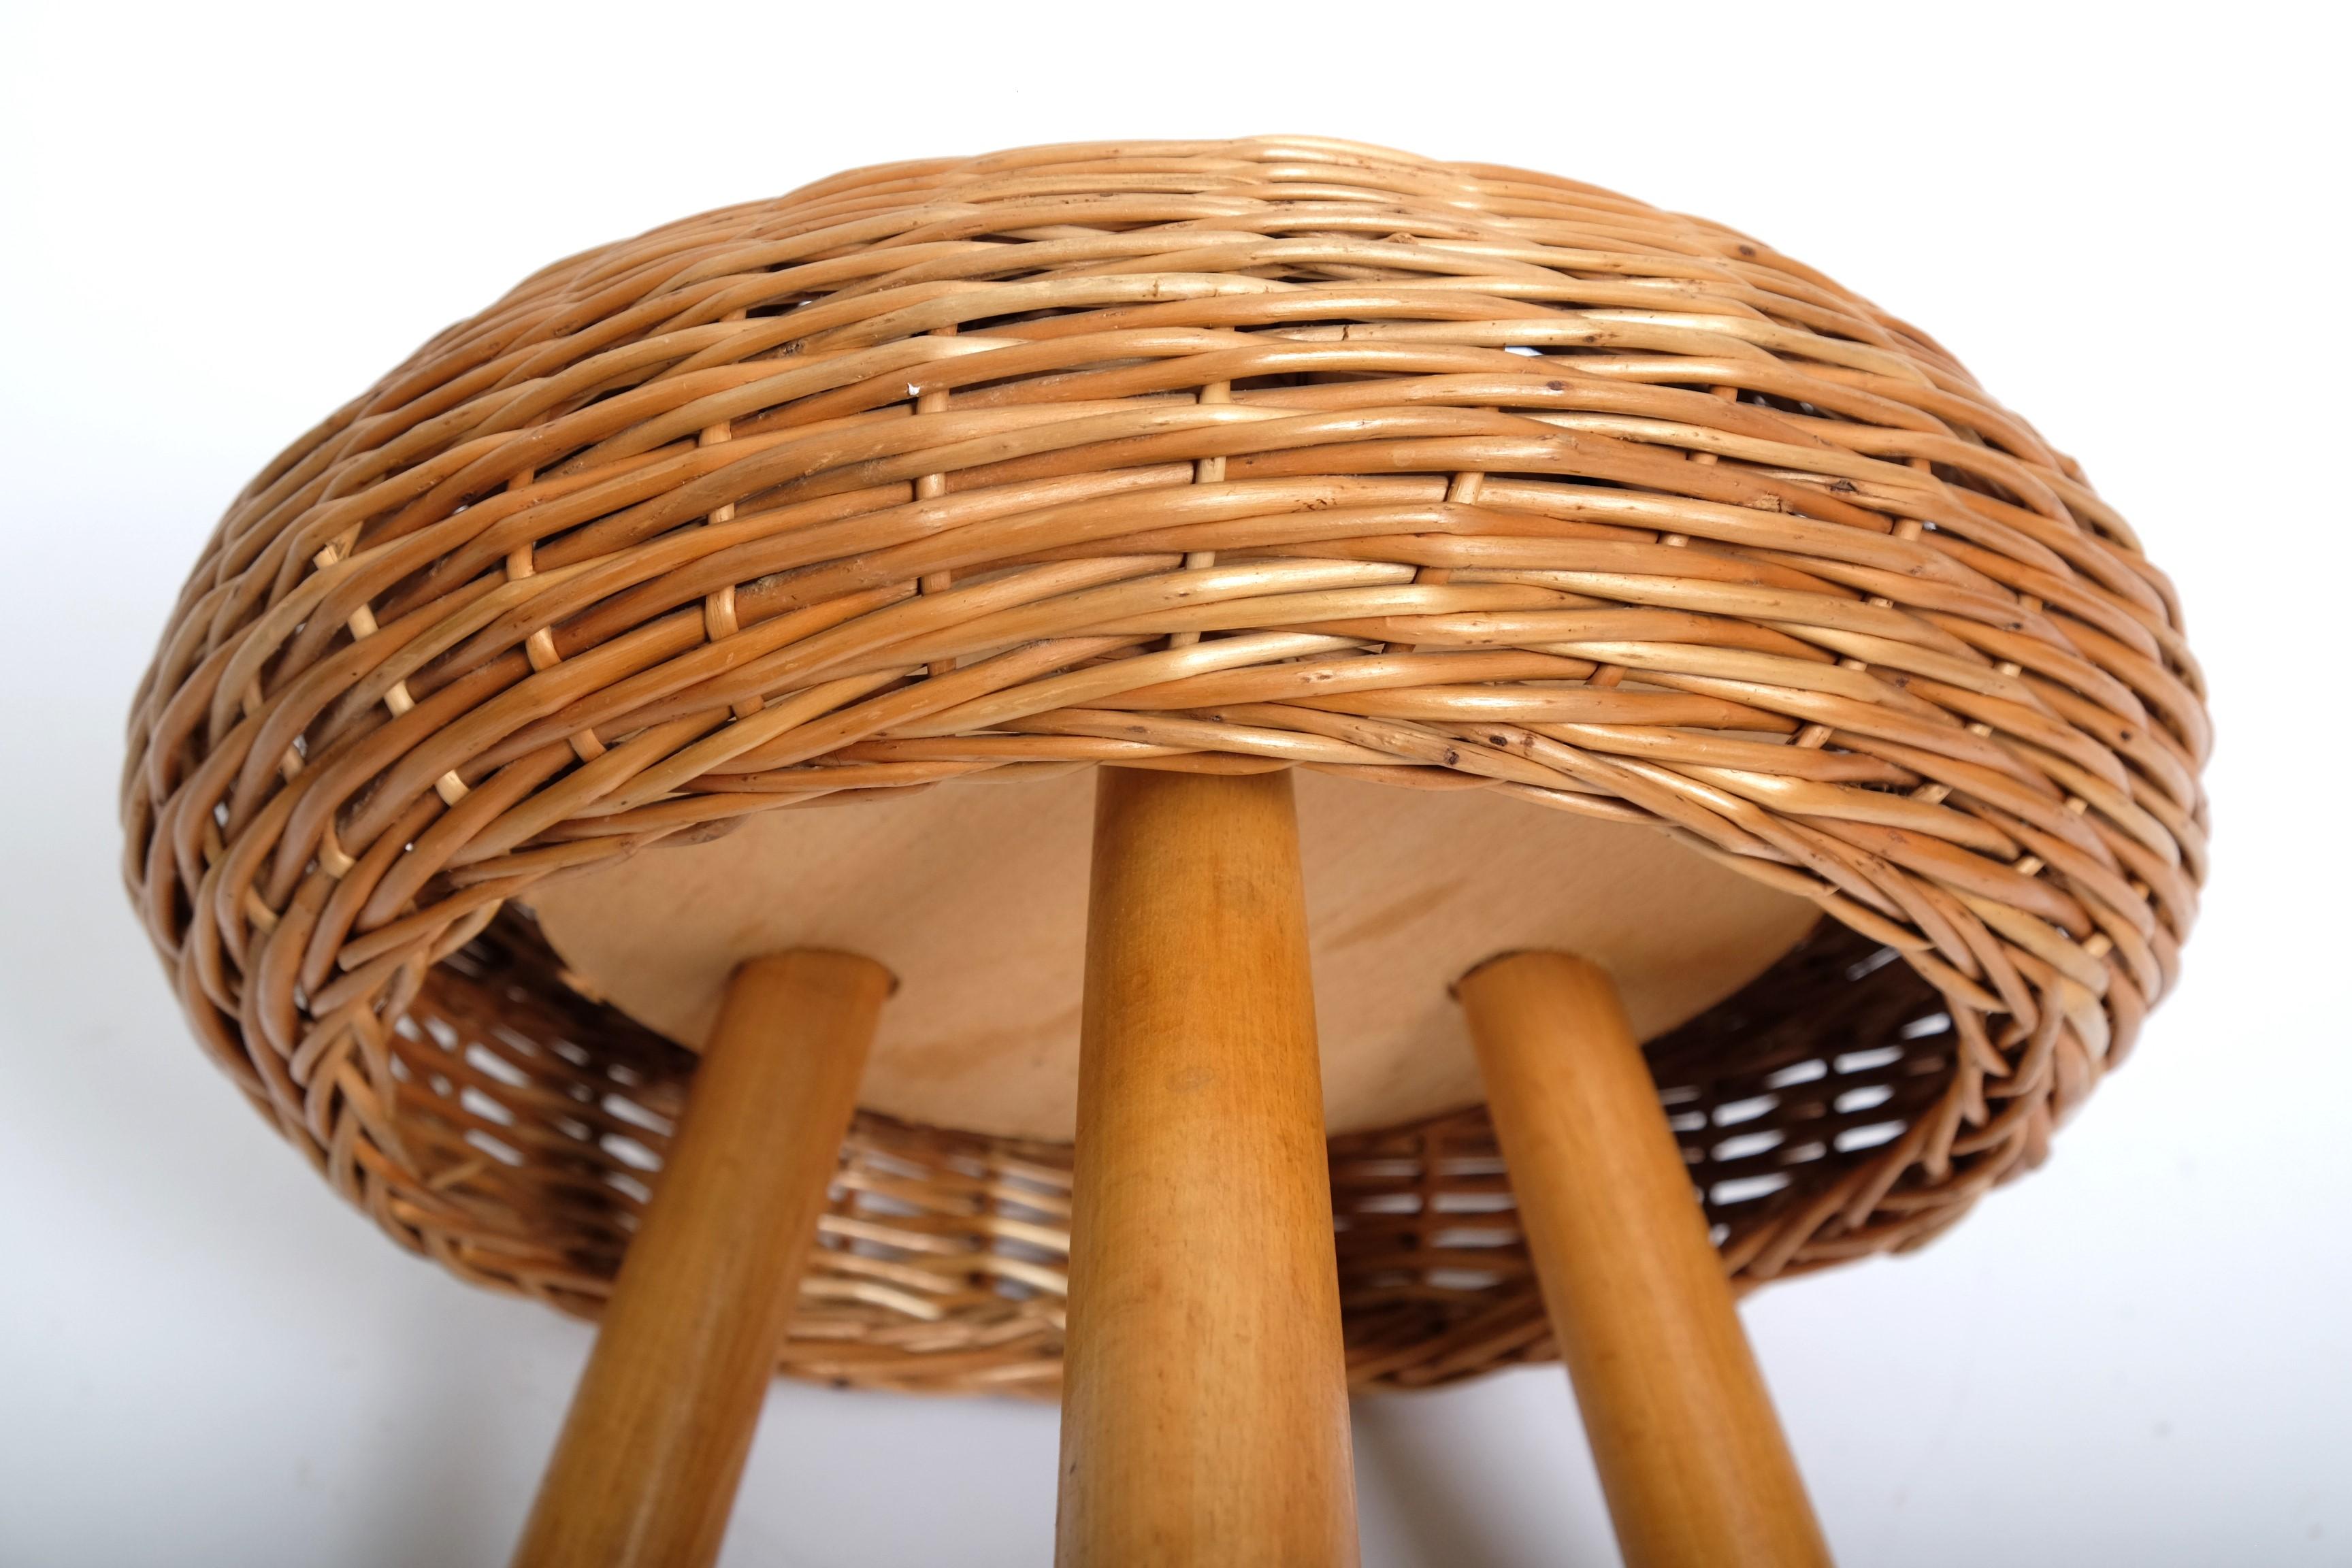 Tony Paul 'Attributed' Stool Wicker Wood, United States 1950s For Sale 8